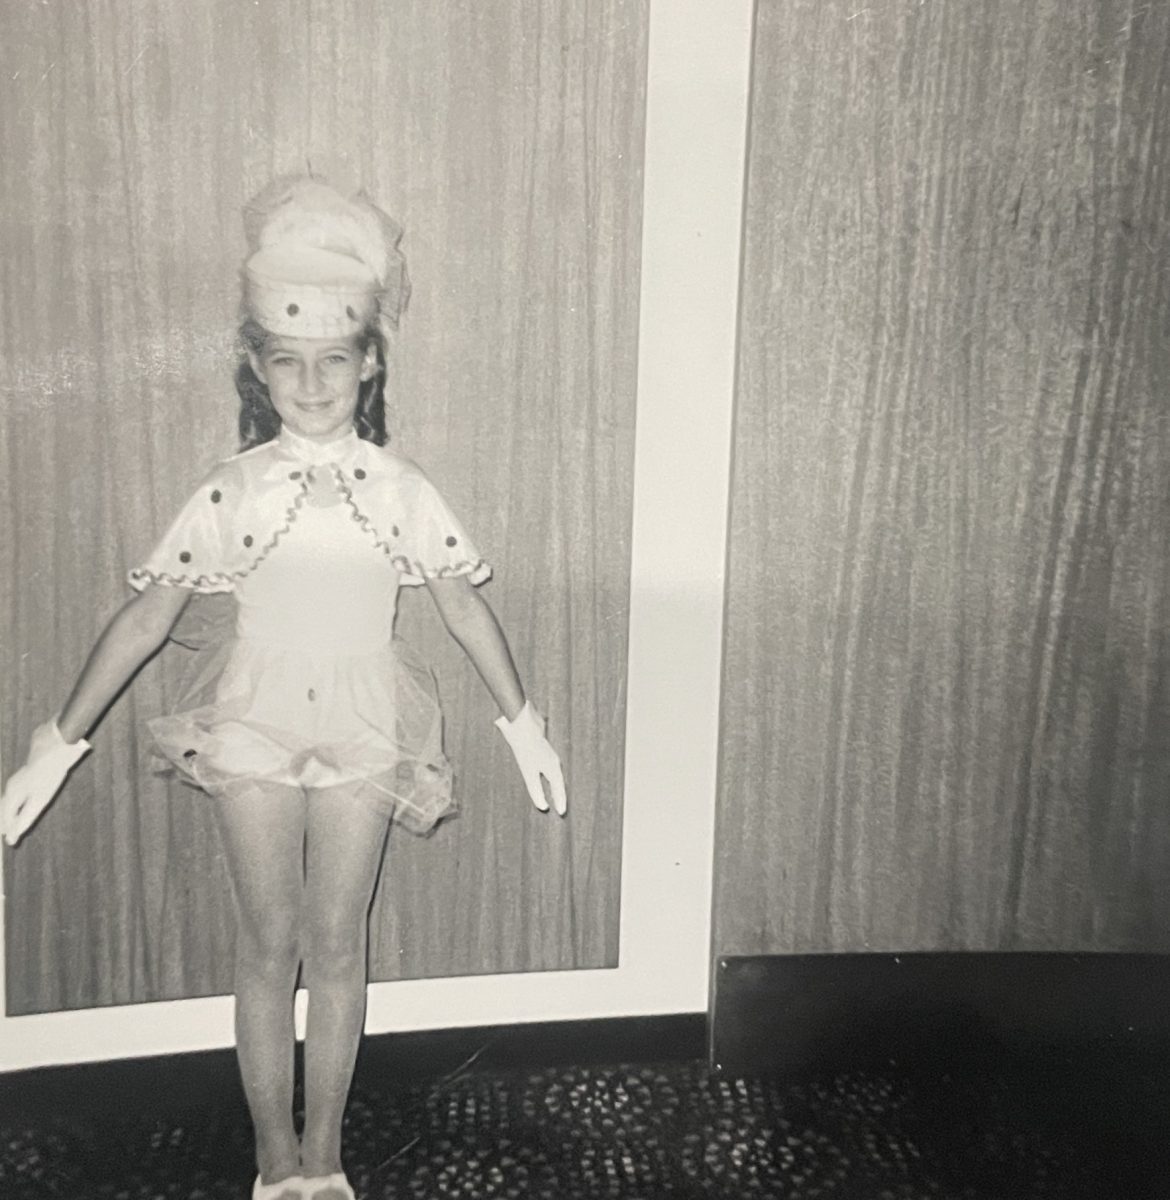 Louise Hudson in costume as 9 or 10 year old. 